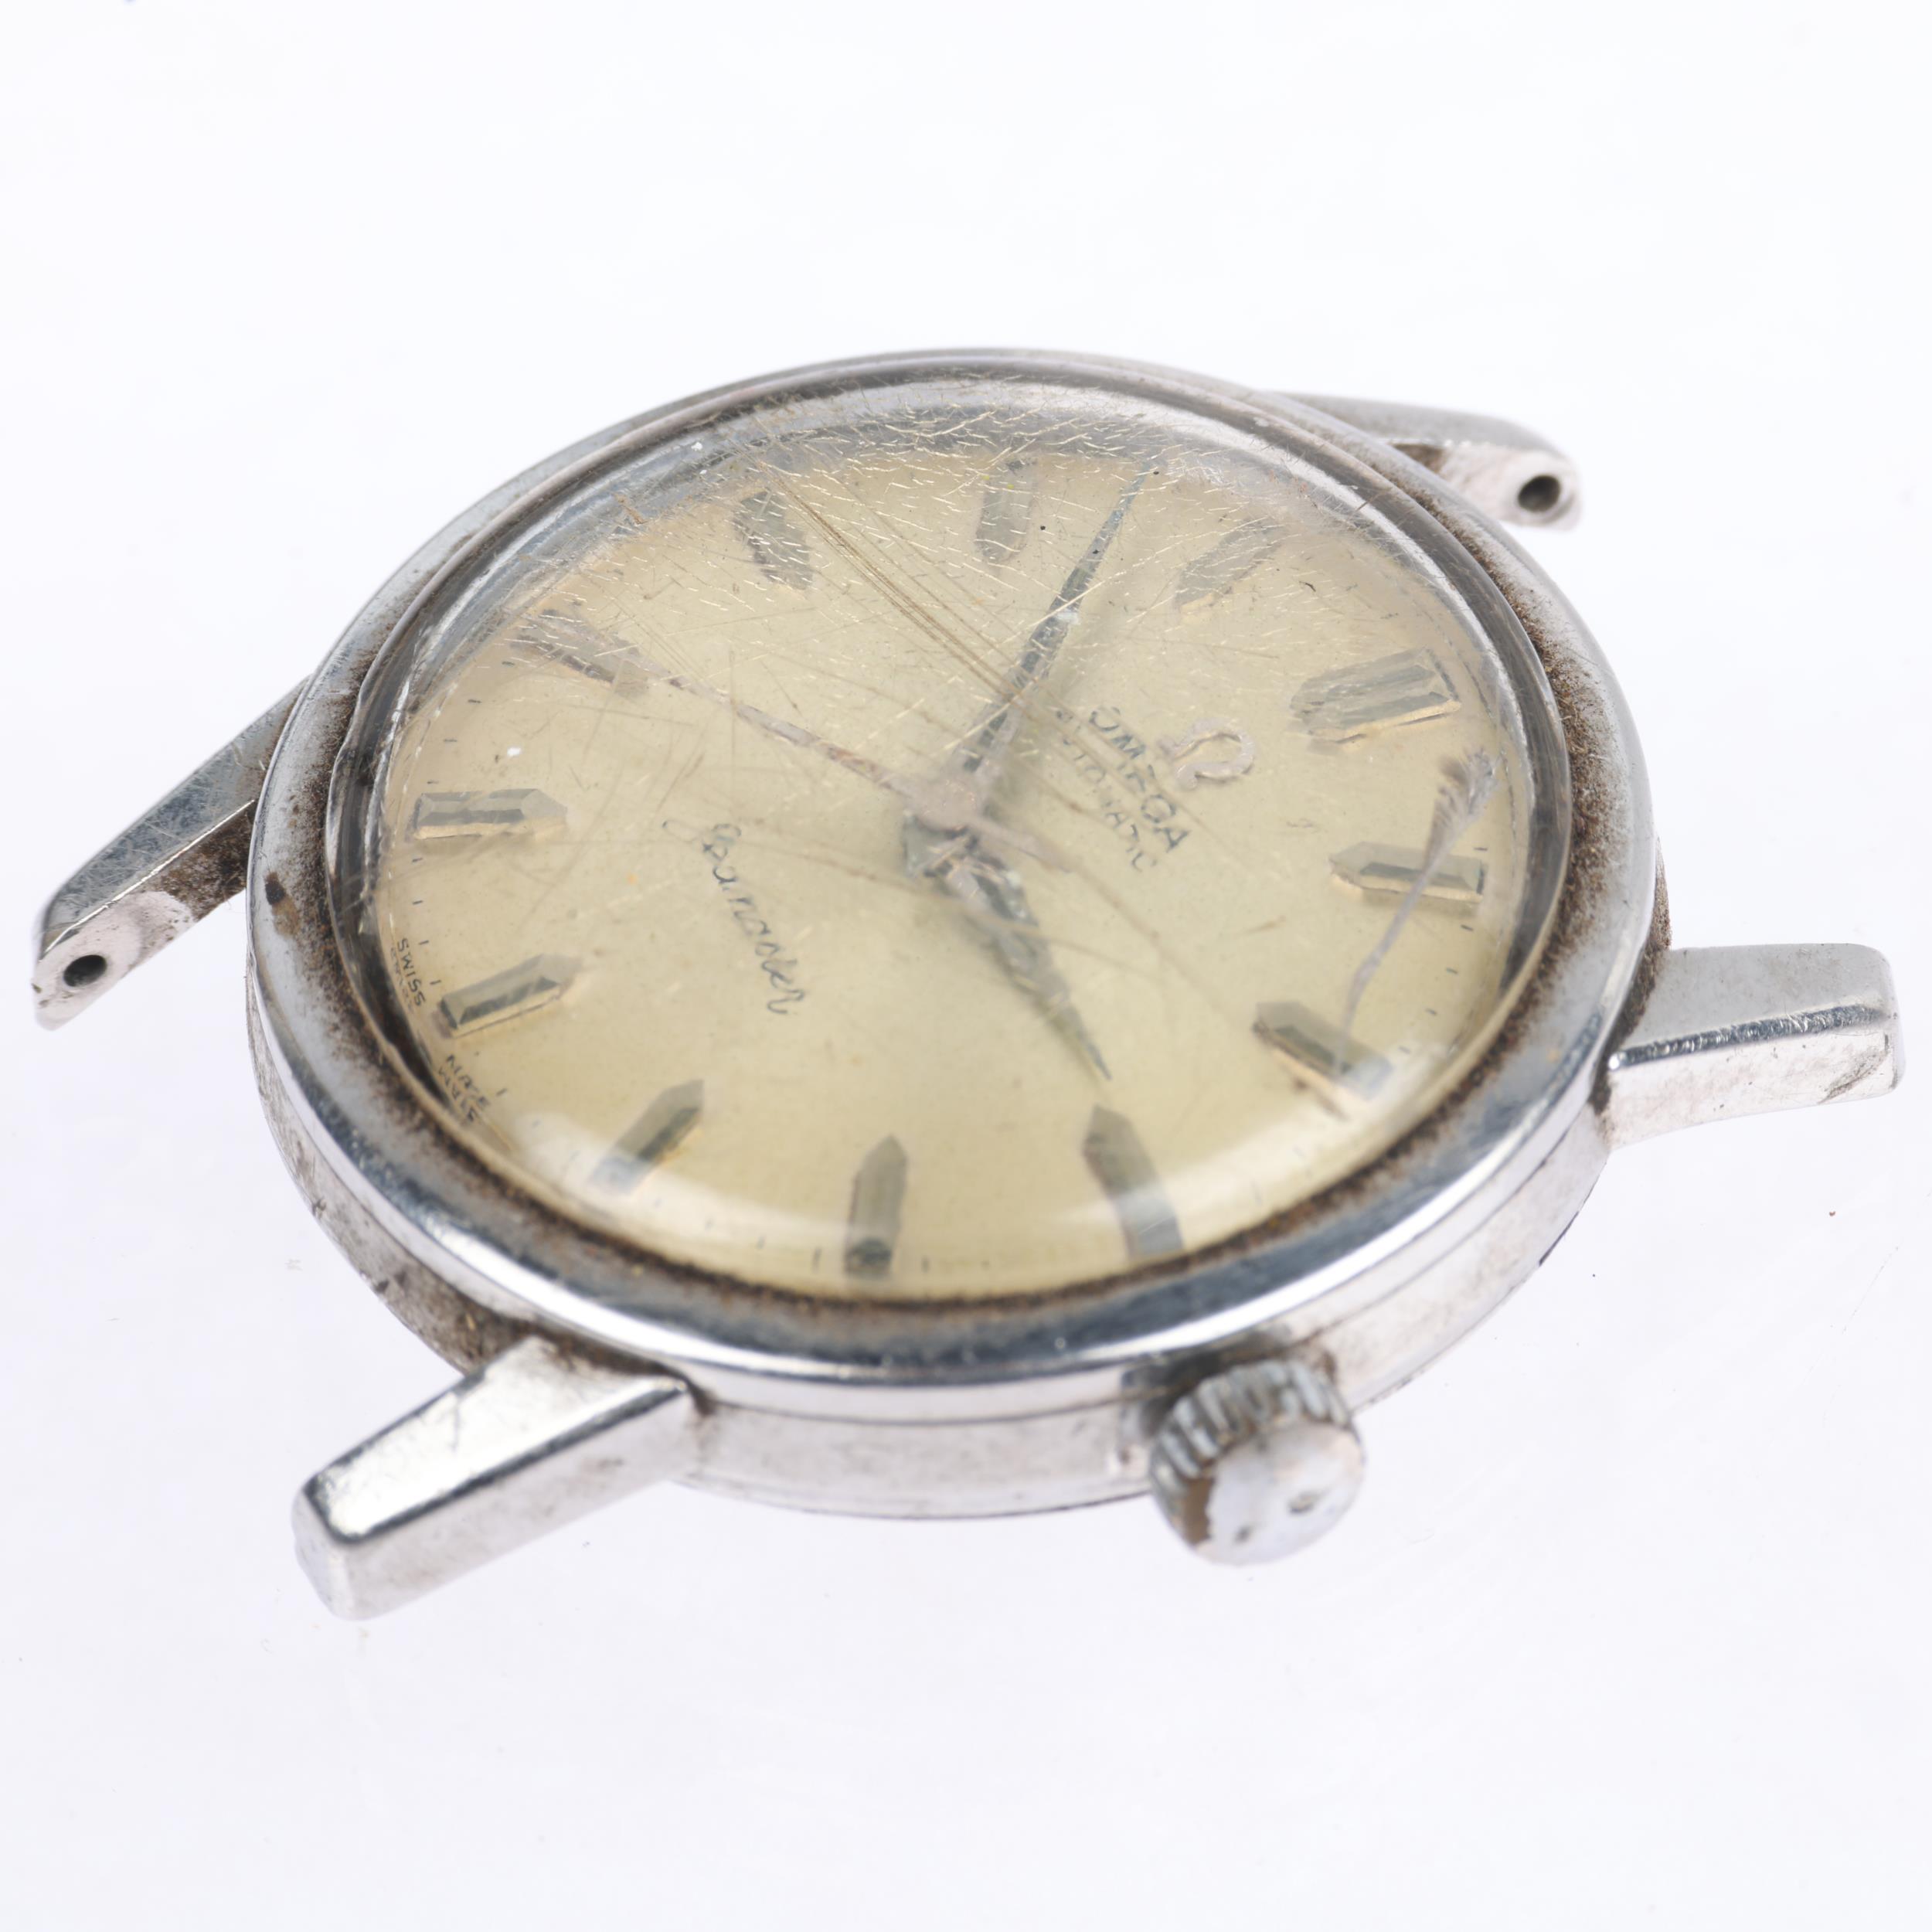 OMEGA - a stainless steel Seamaster automatic wristwatch head, ref. 14762 61 SC, circa 1960, - Image 3 of 5